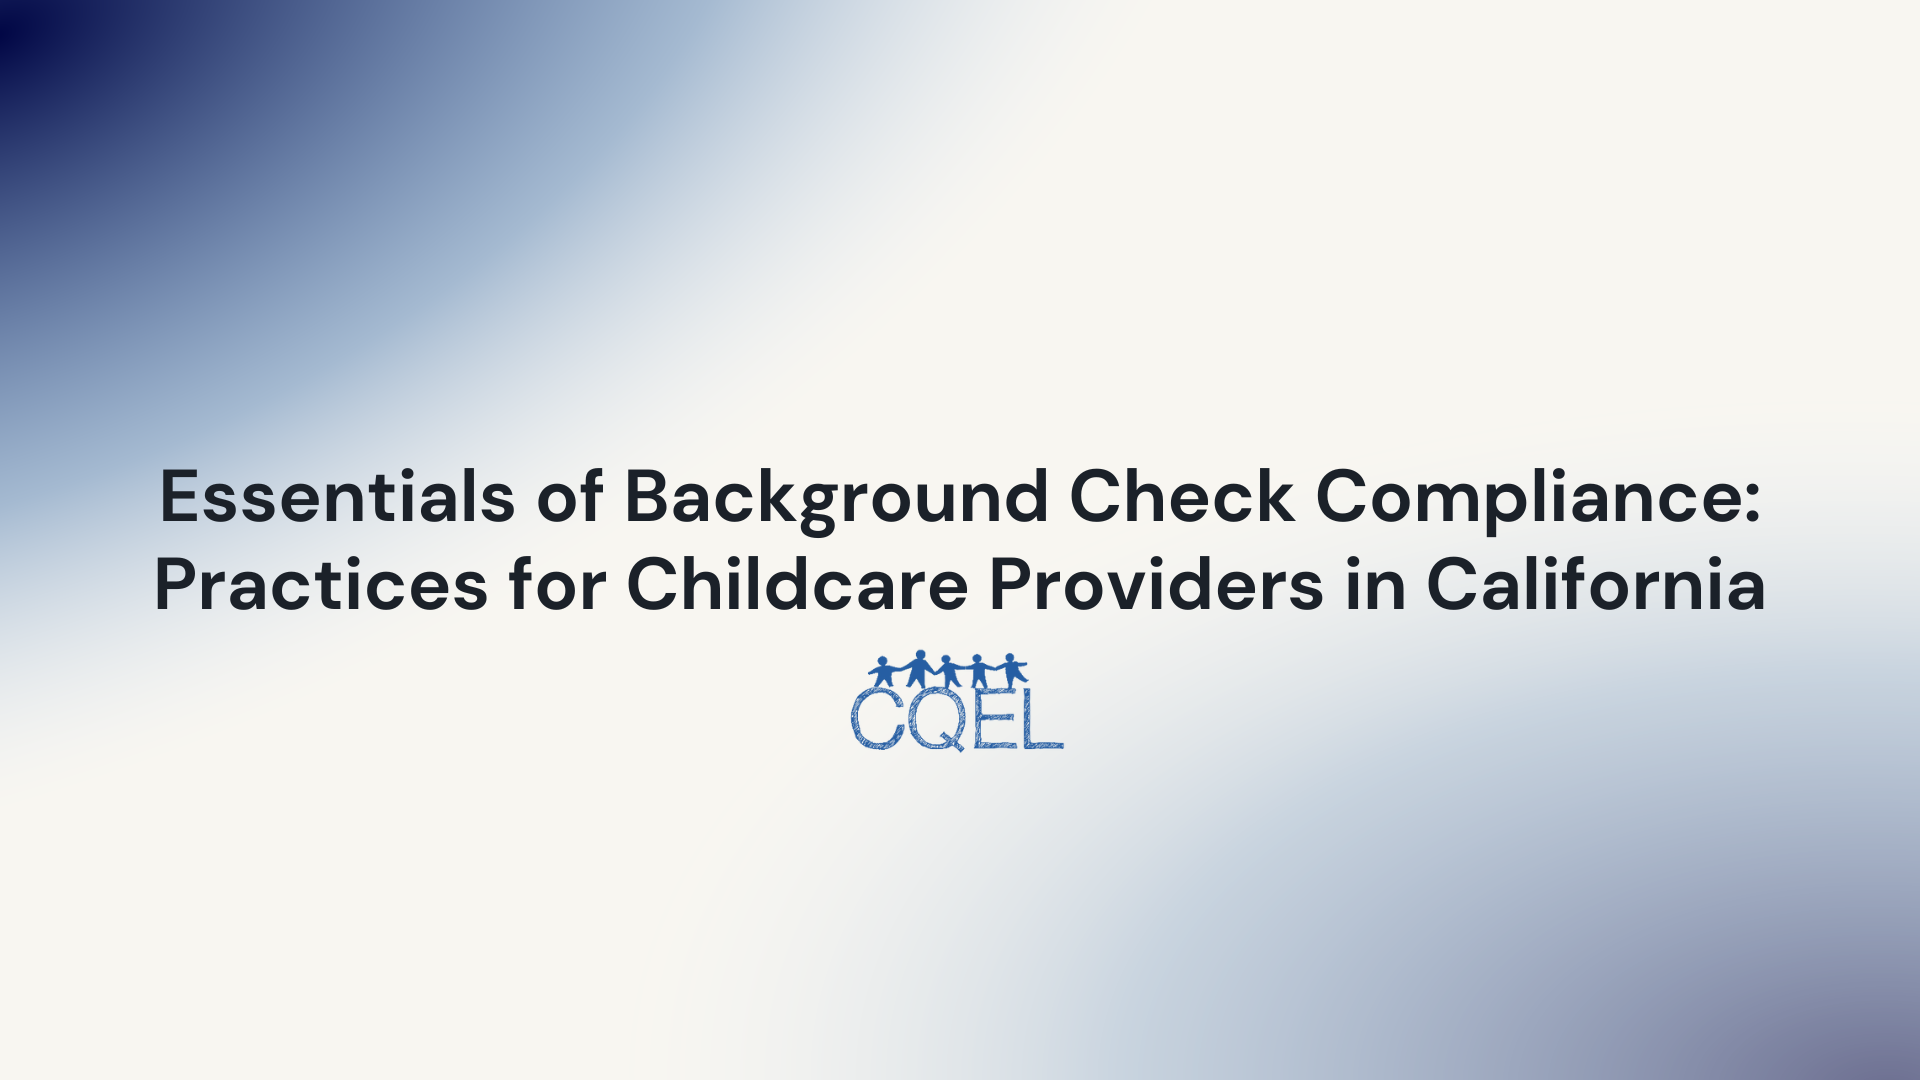 Essentials of Background Check Compliance: Practices for Childcare Providers in California